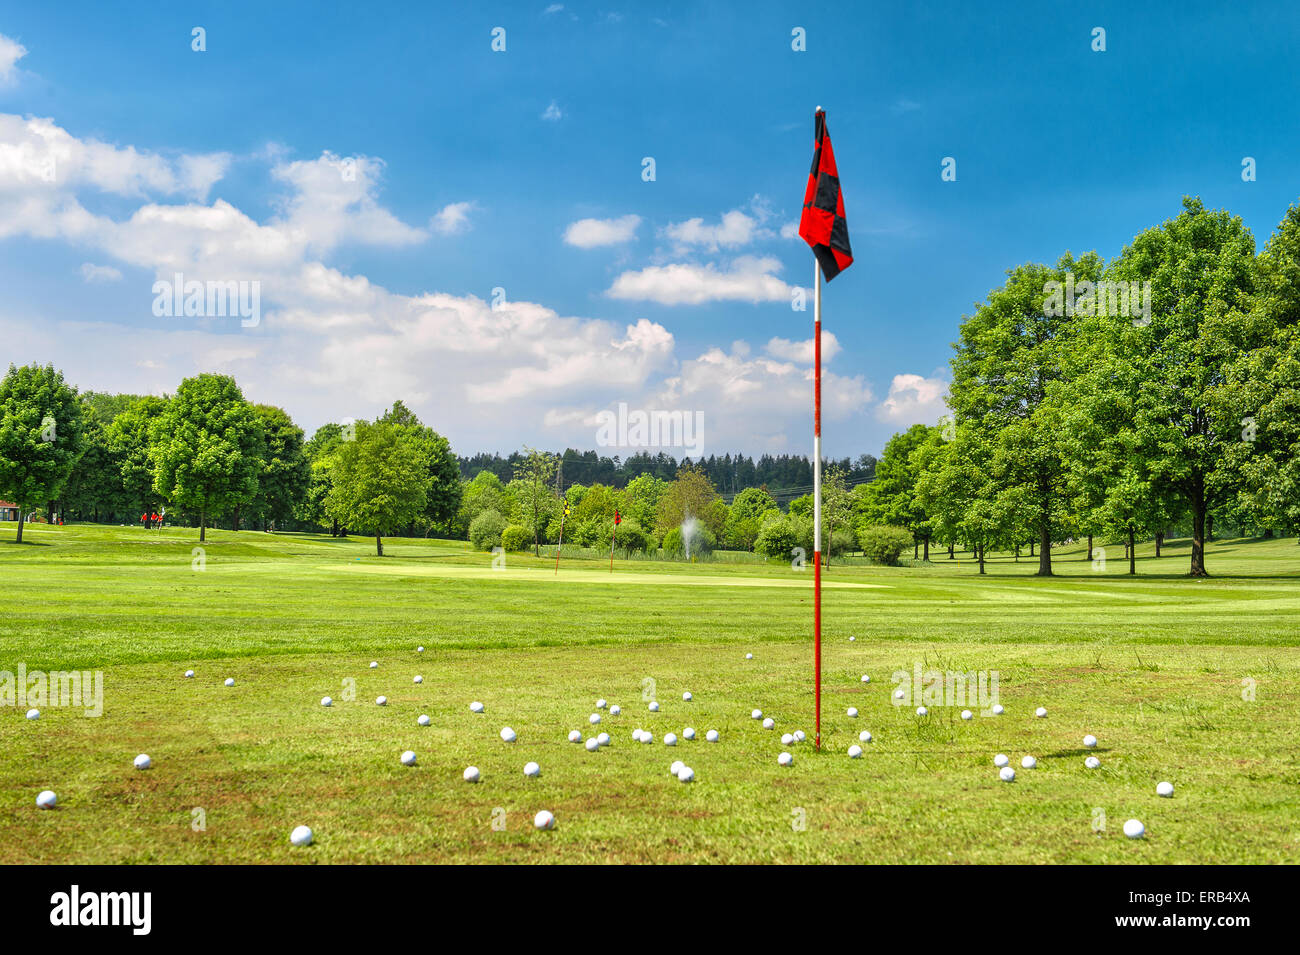 Golf field and cloudy blue sky. European spring landscape with green grass and trees Stock Photo